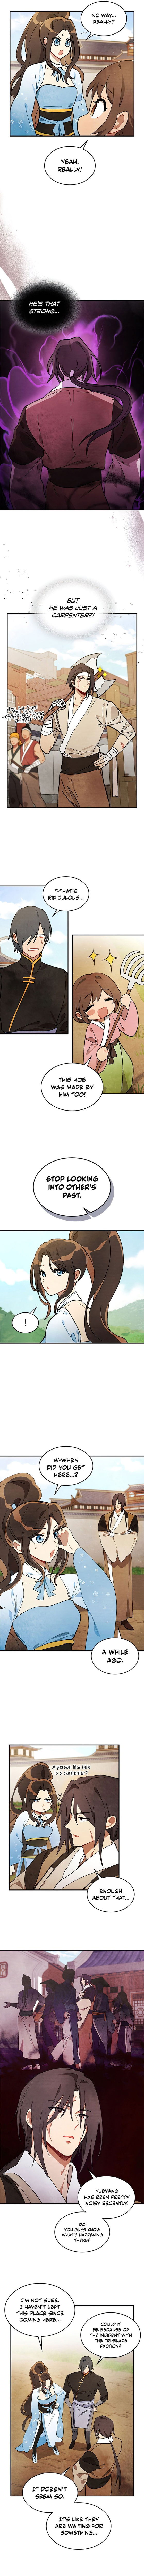 chronicles-of-the-martial-gods-return-chap-36-5